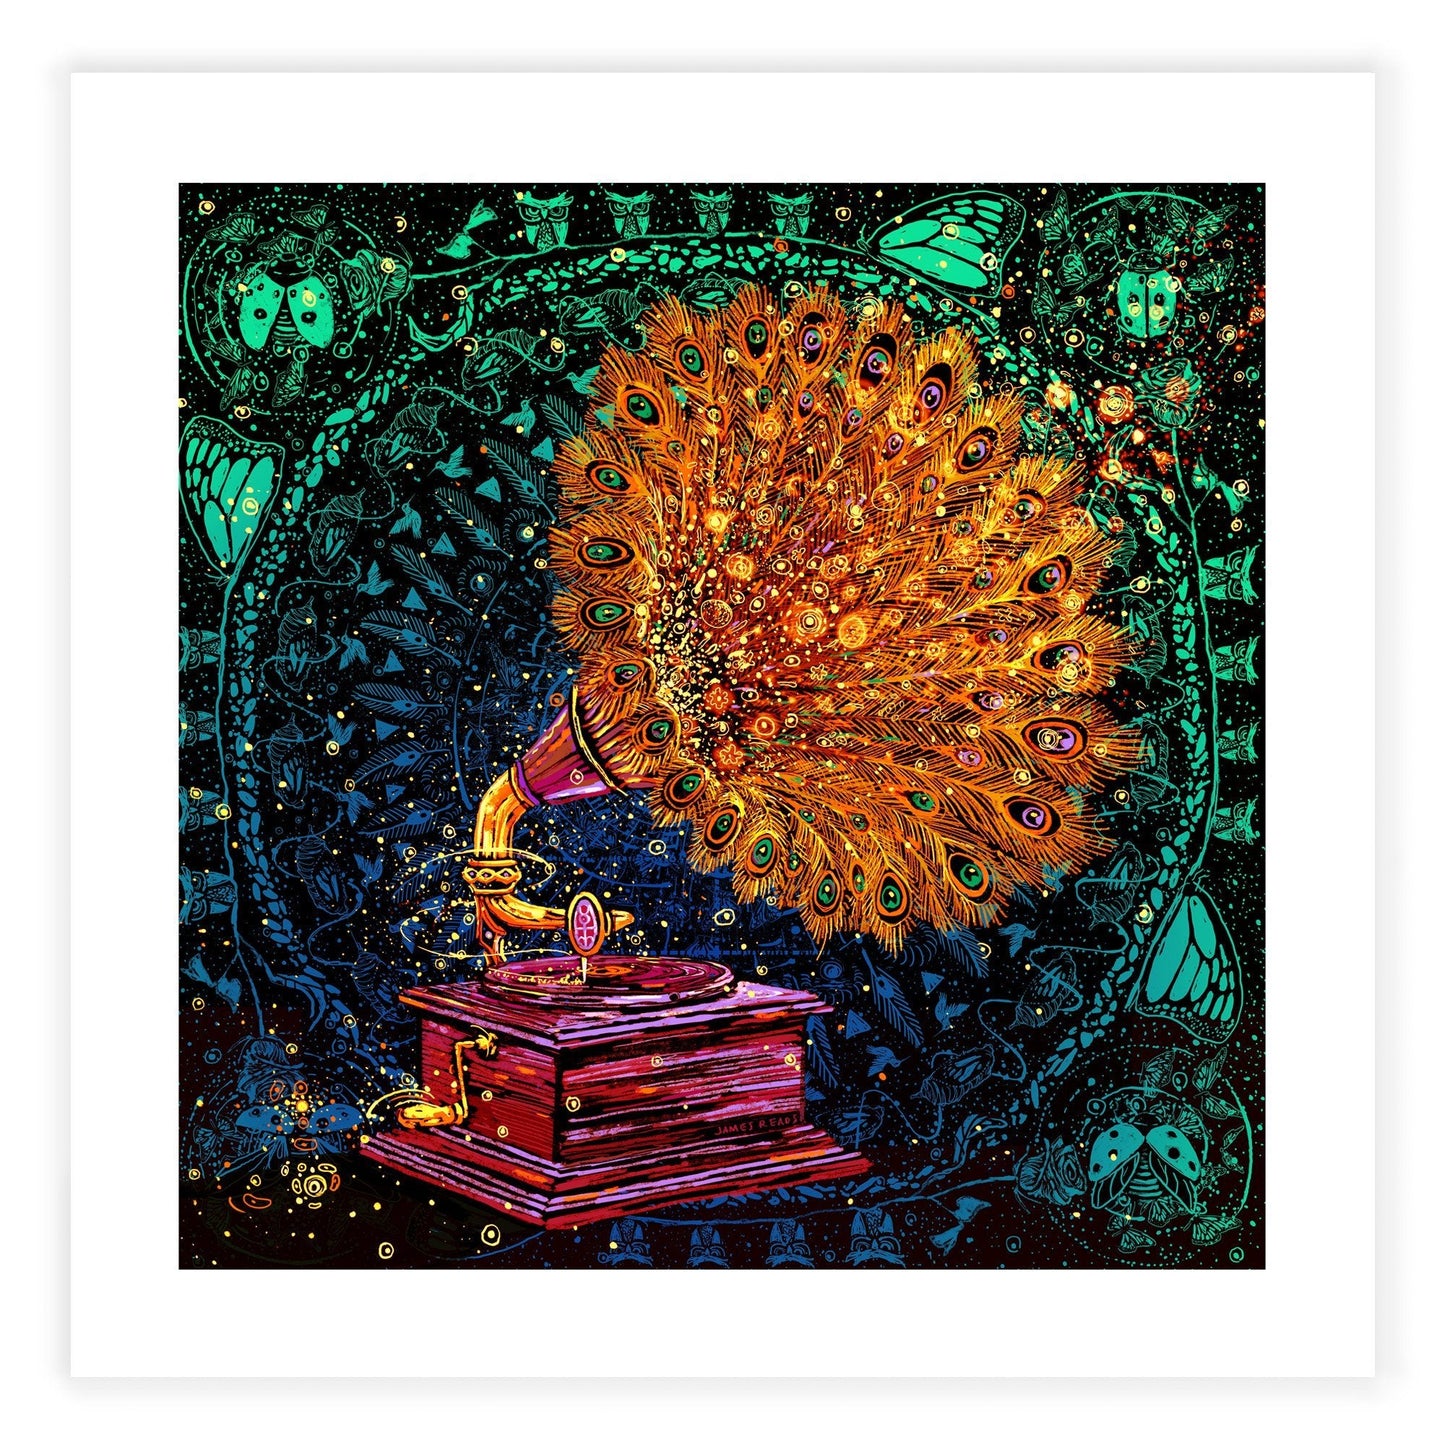 The Goldfeather Player (Limited Edition of 250) Print James R. Eads